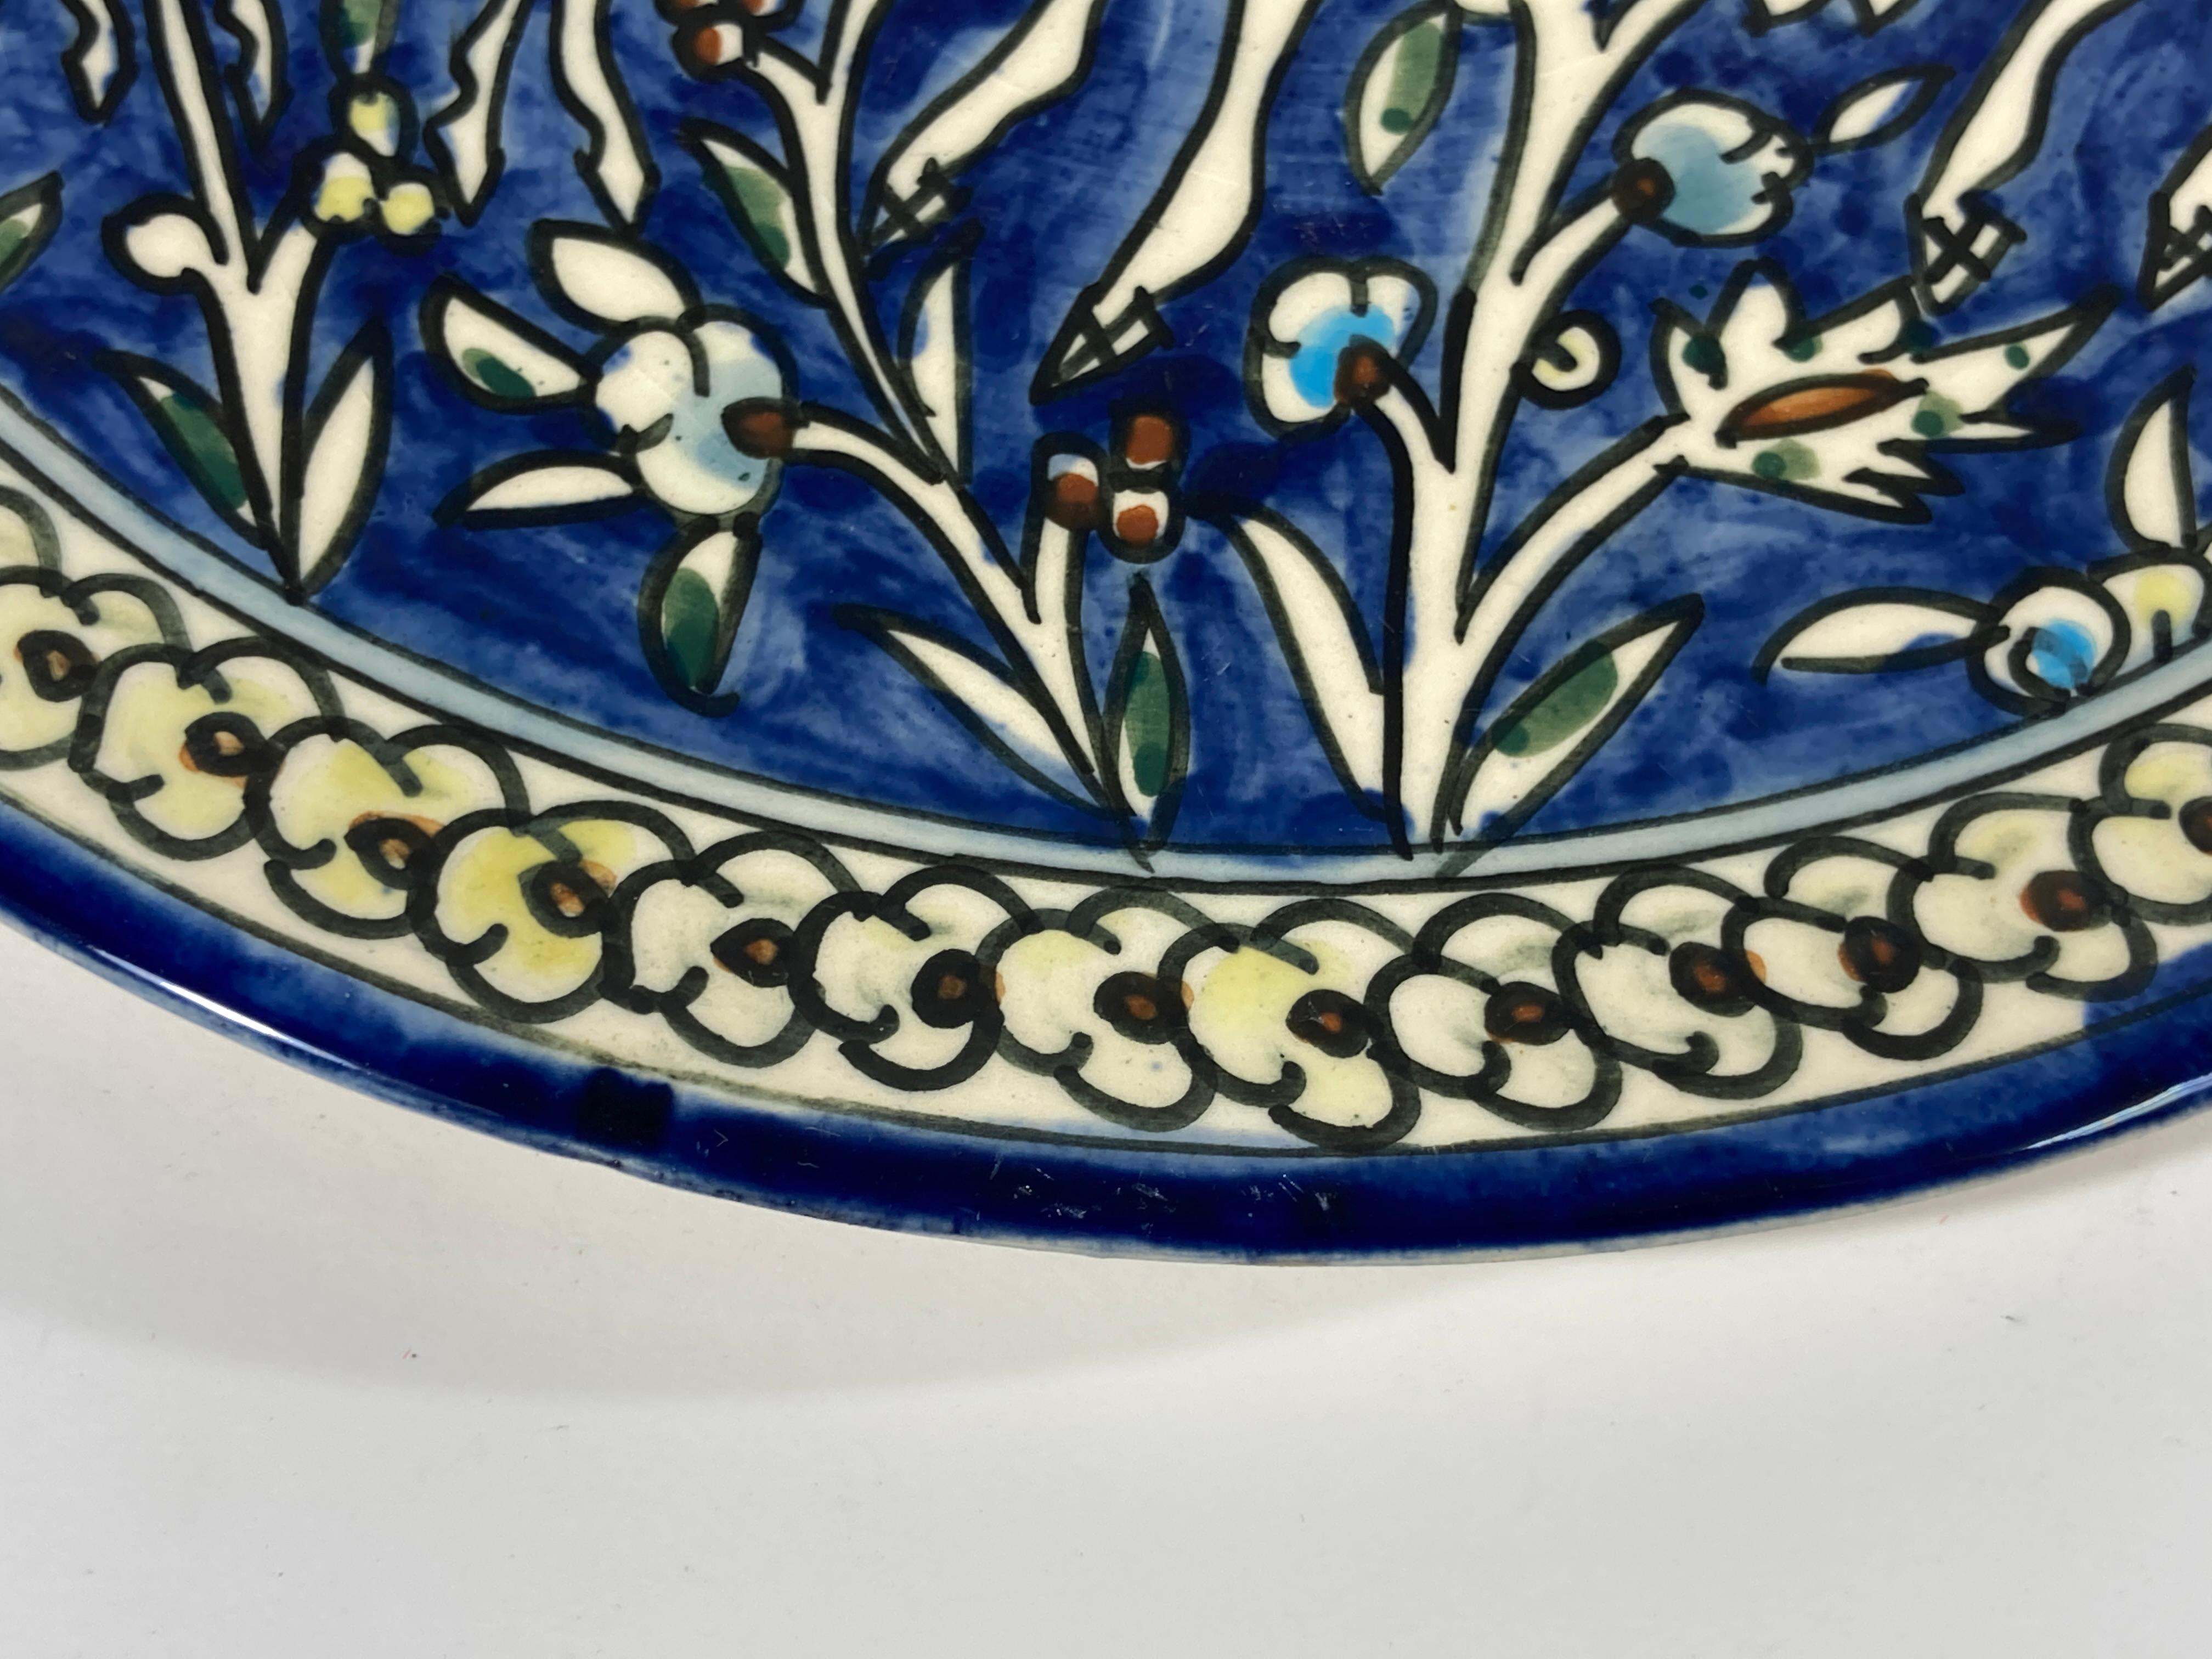 Jerusalem Polychrome Hand Painted Ceramic Plate In Good Condition For Sale In North Hollywood, CA